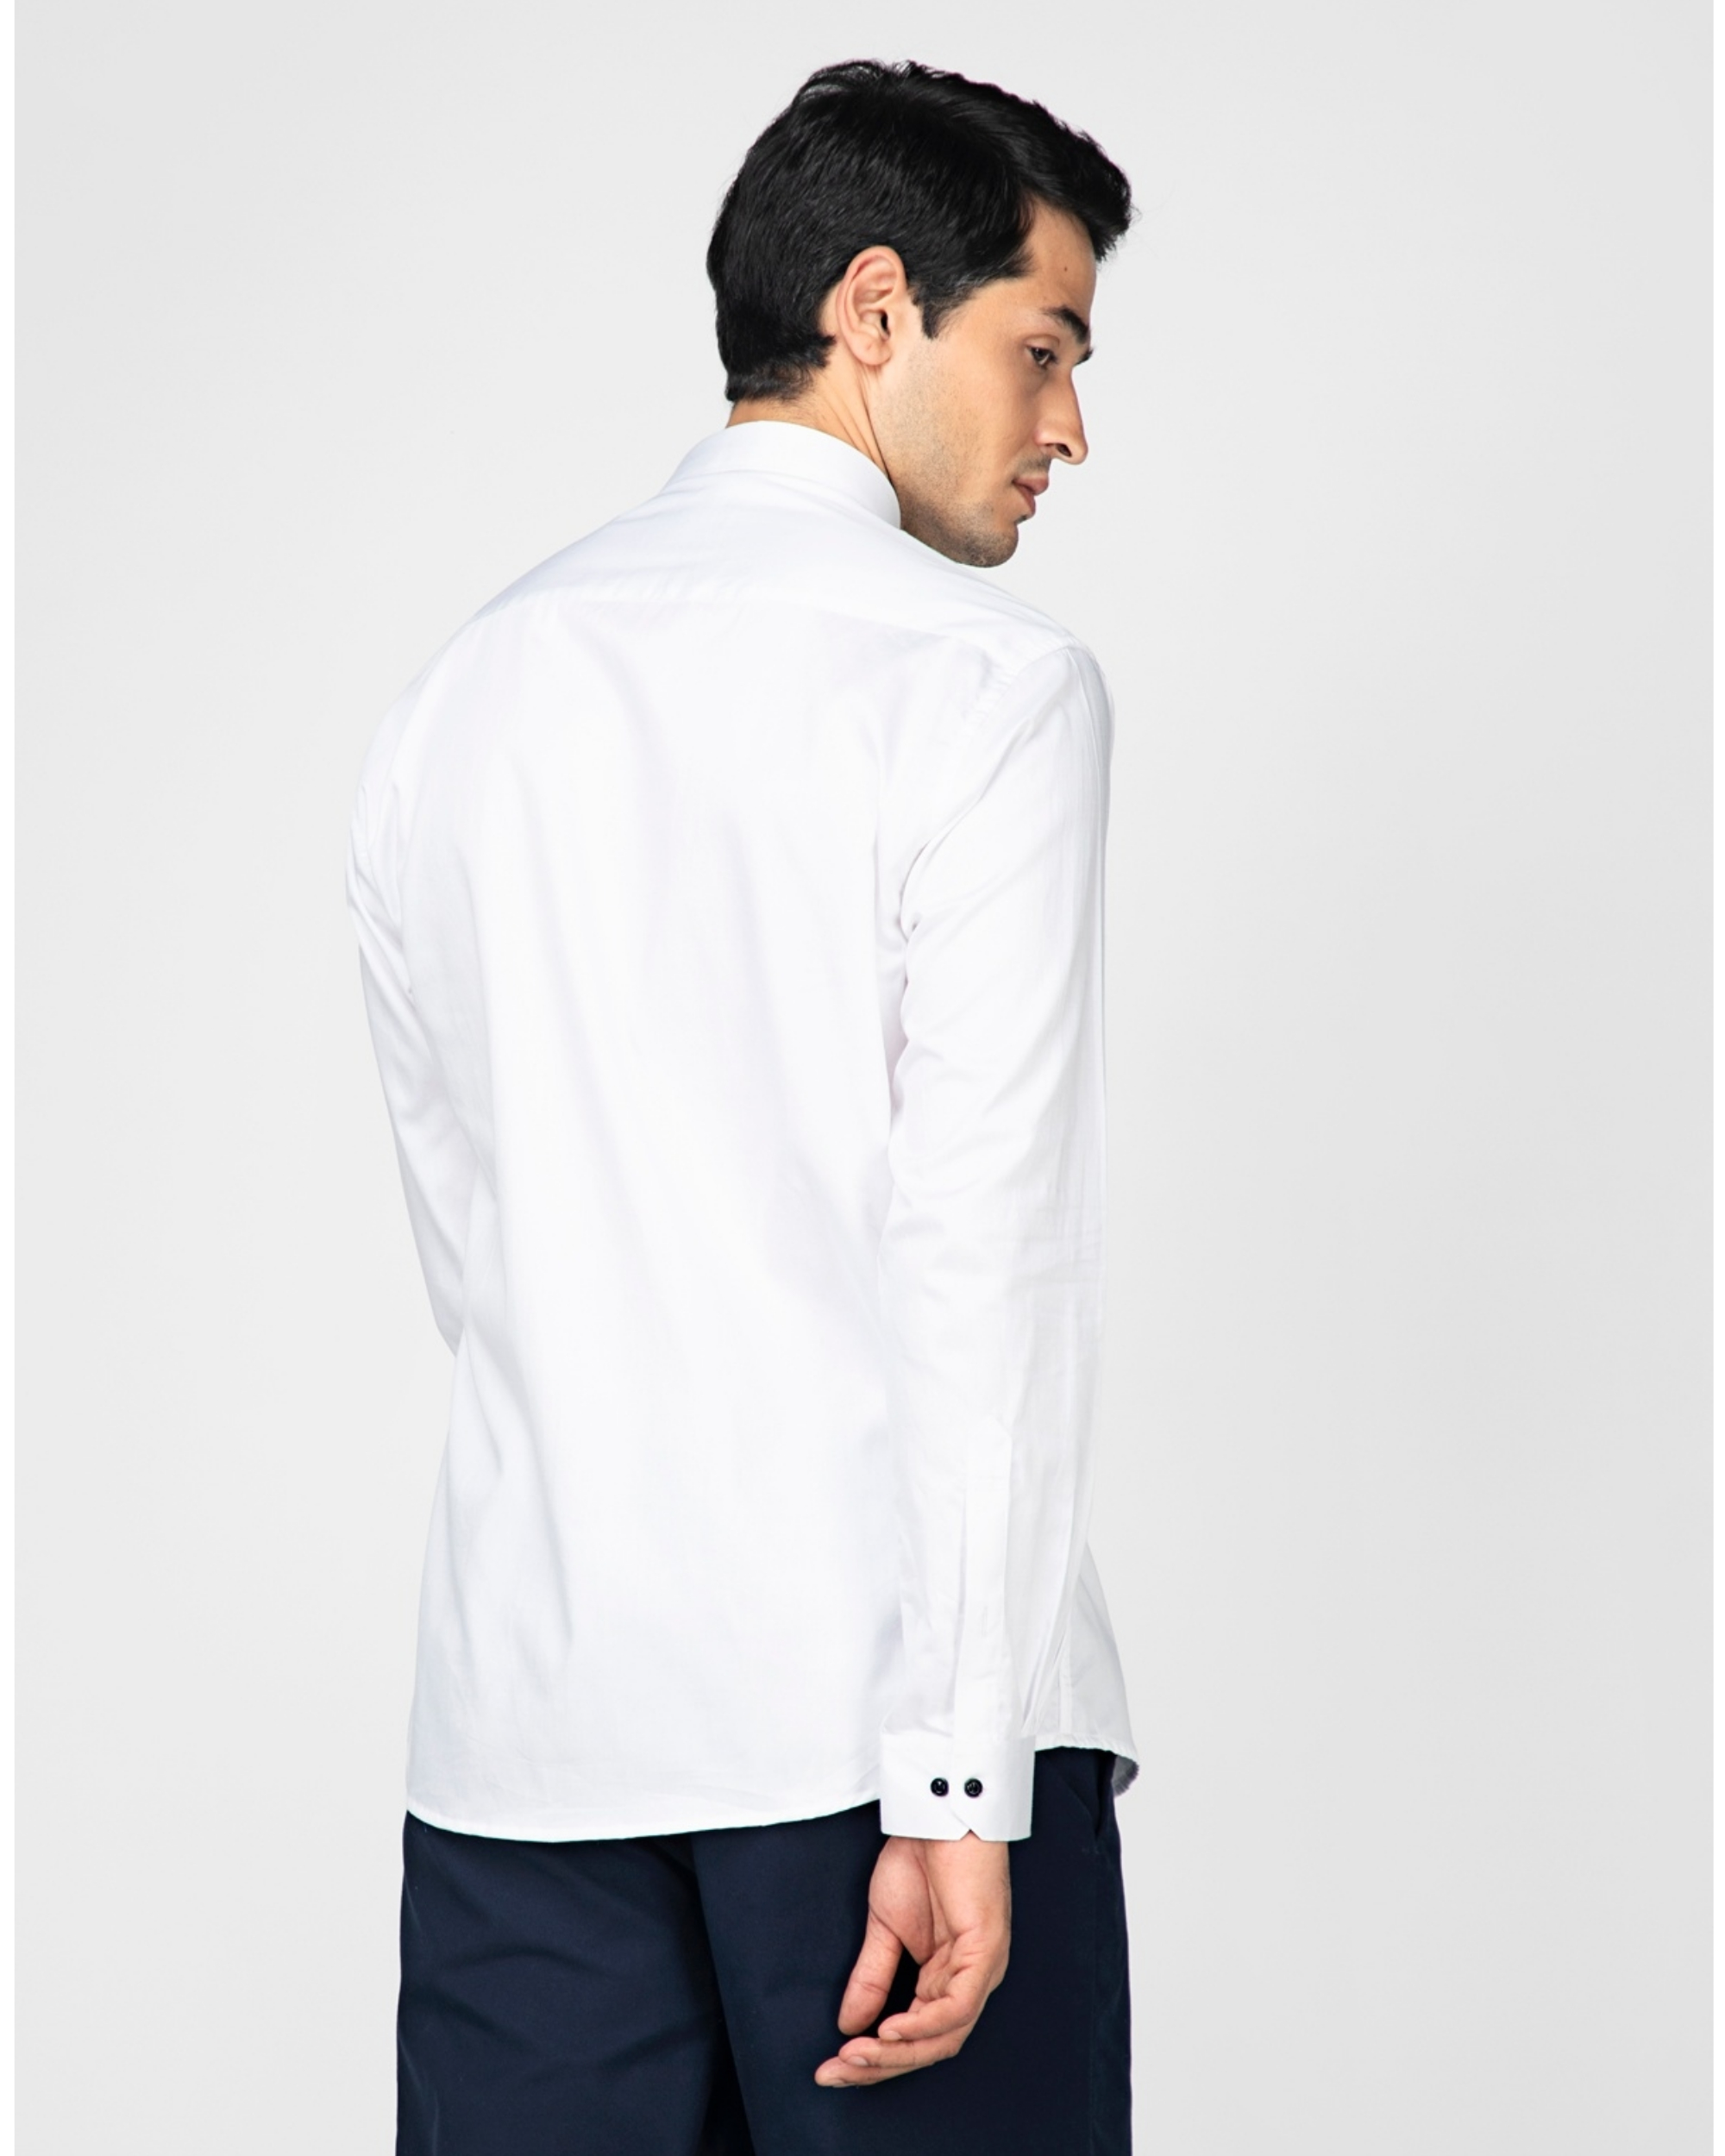 White and black tri panels striped shirt by Green Hill | The Secret Label